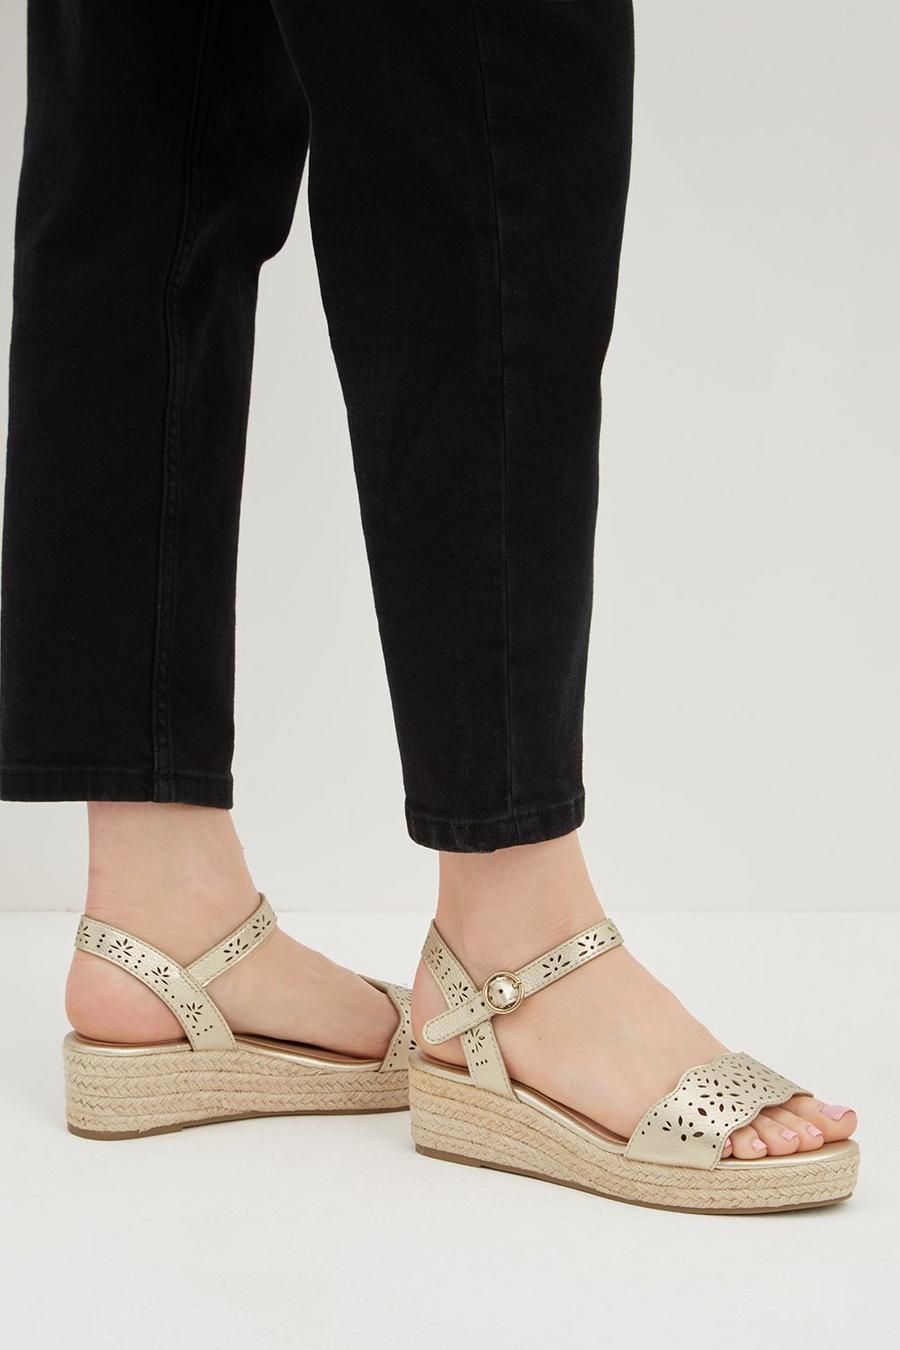 Rebecca Laser Cut Two Part Low Wedge Sandal